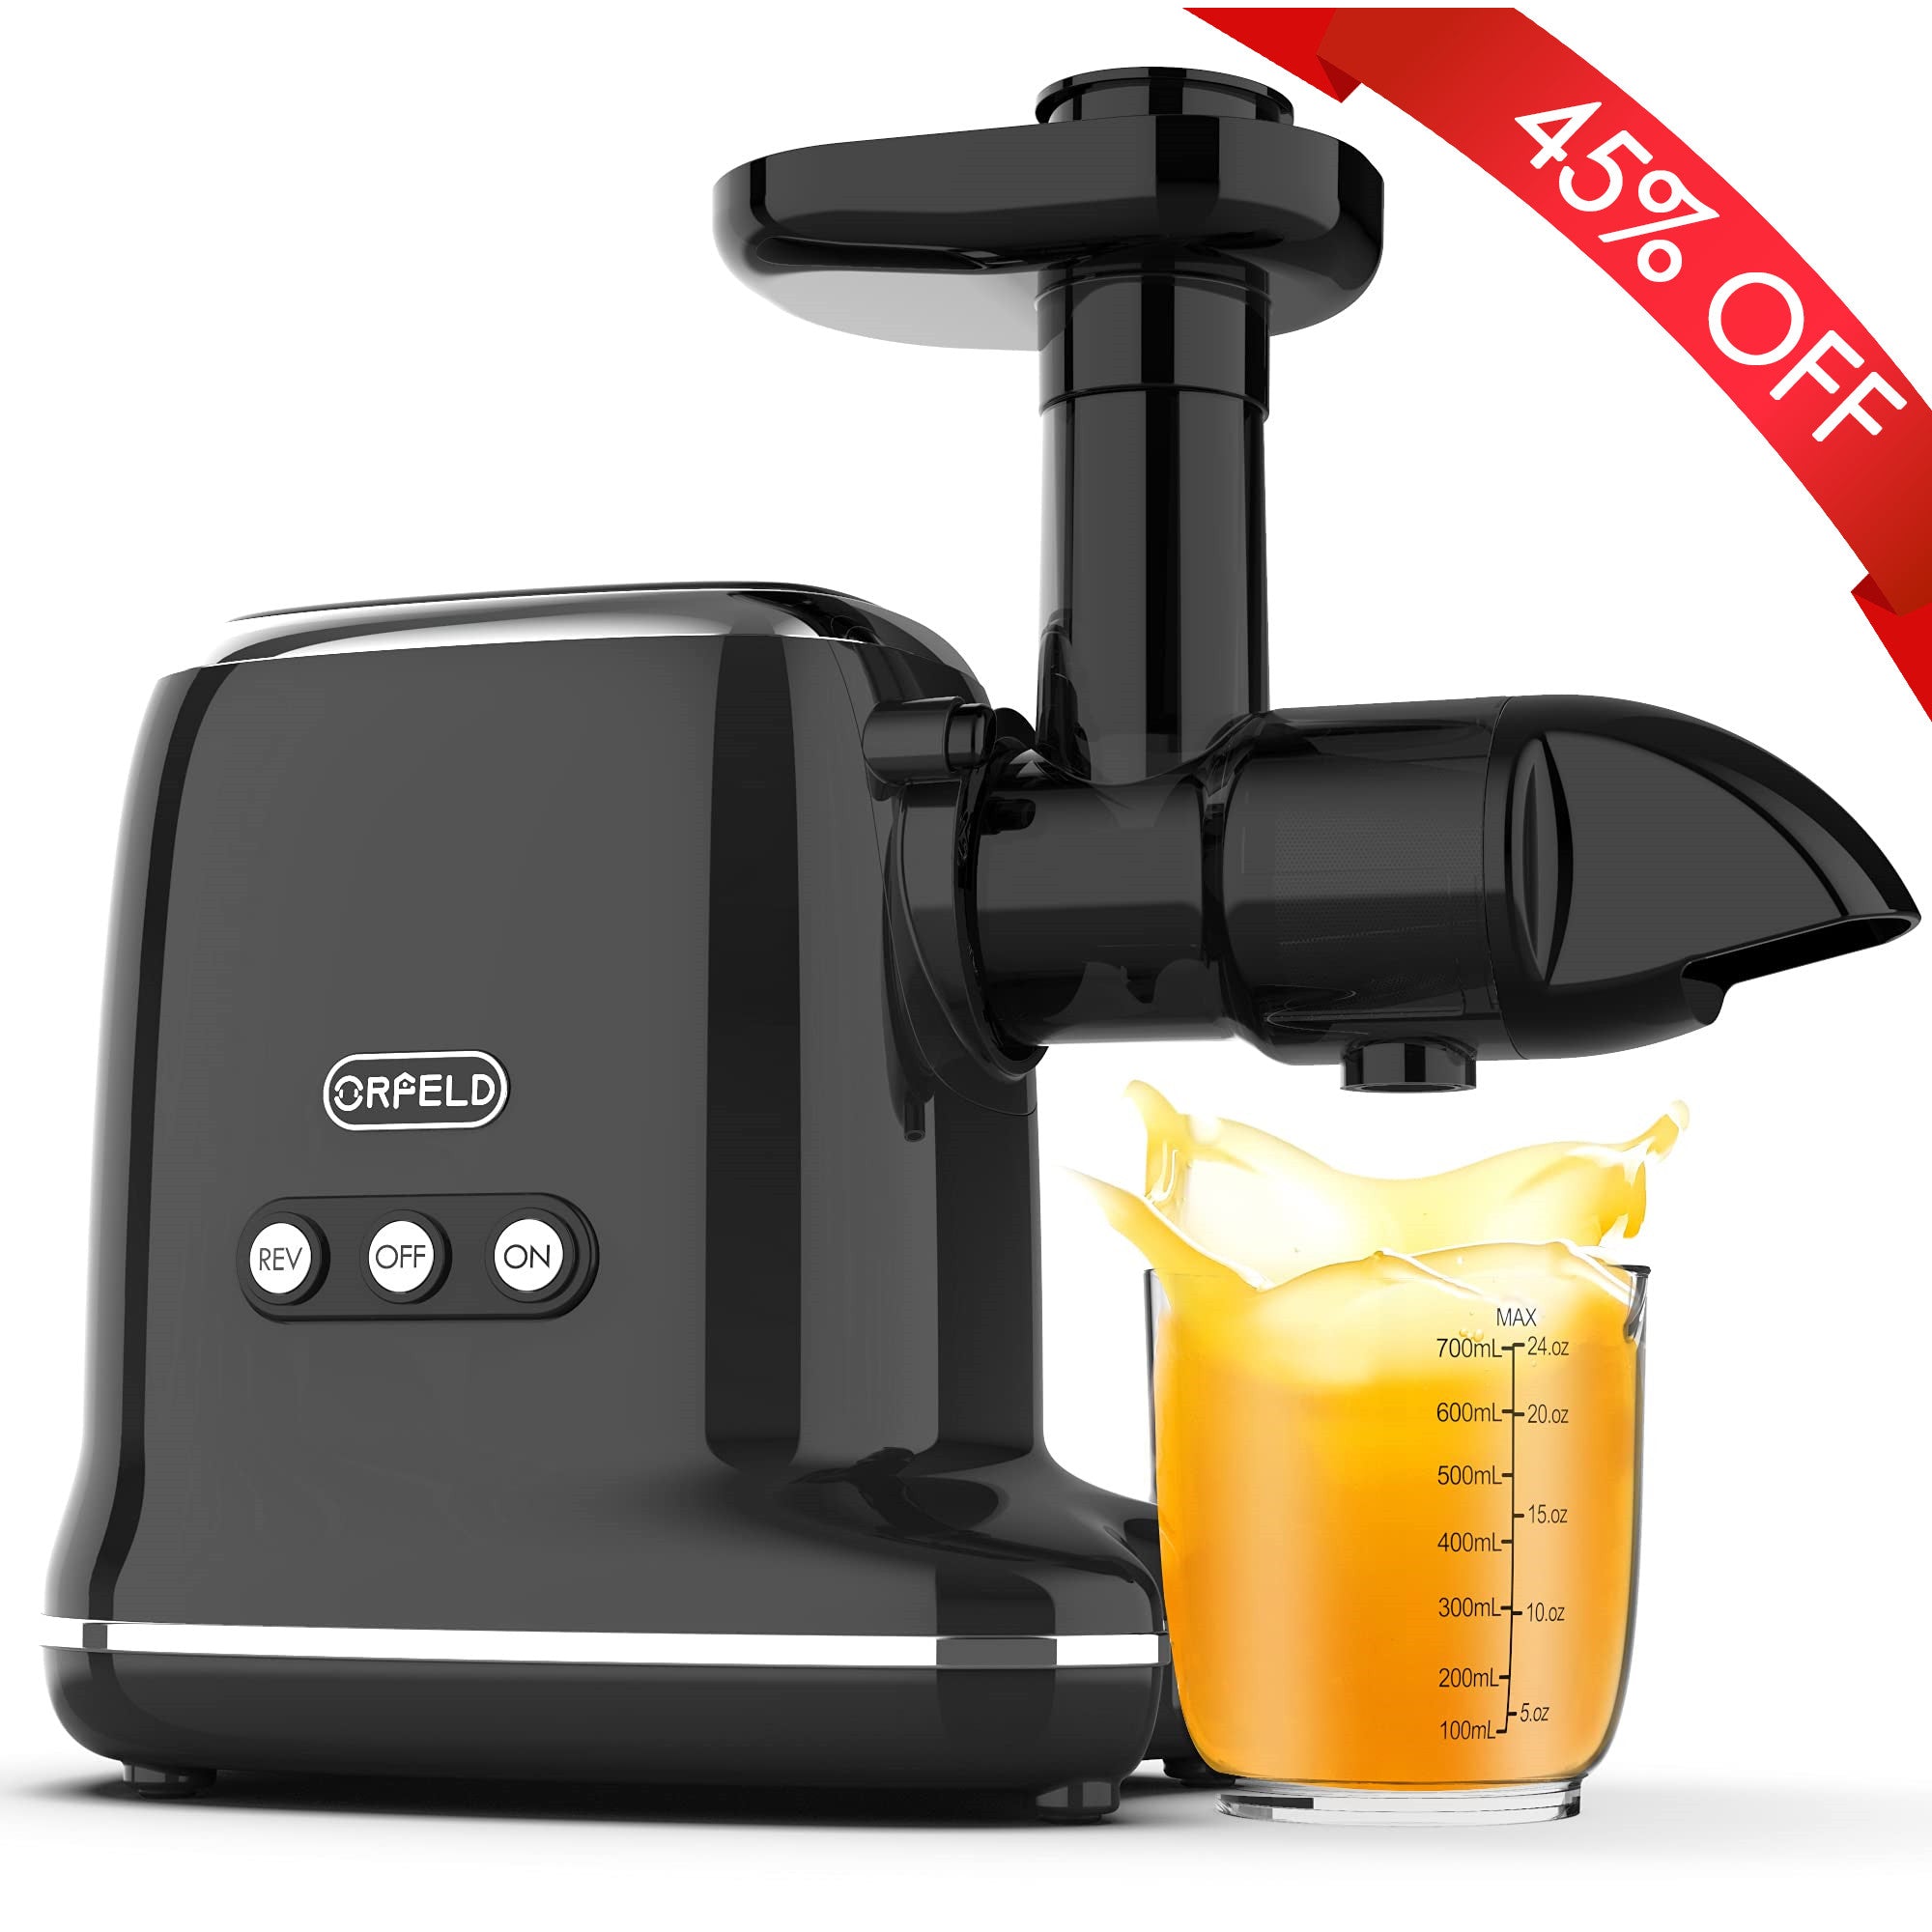 ORFELD Slow Masticating Juicer for Vegetables & Fruits with 90% Juice Yield Black